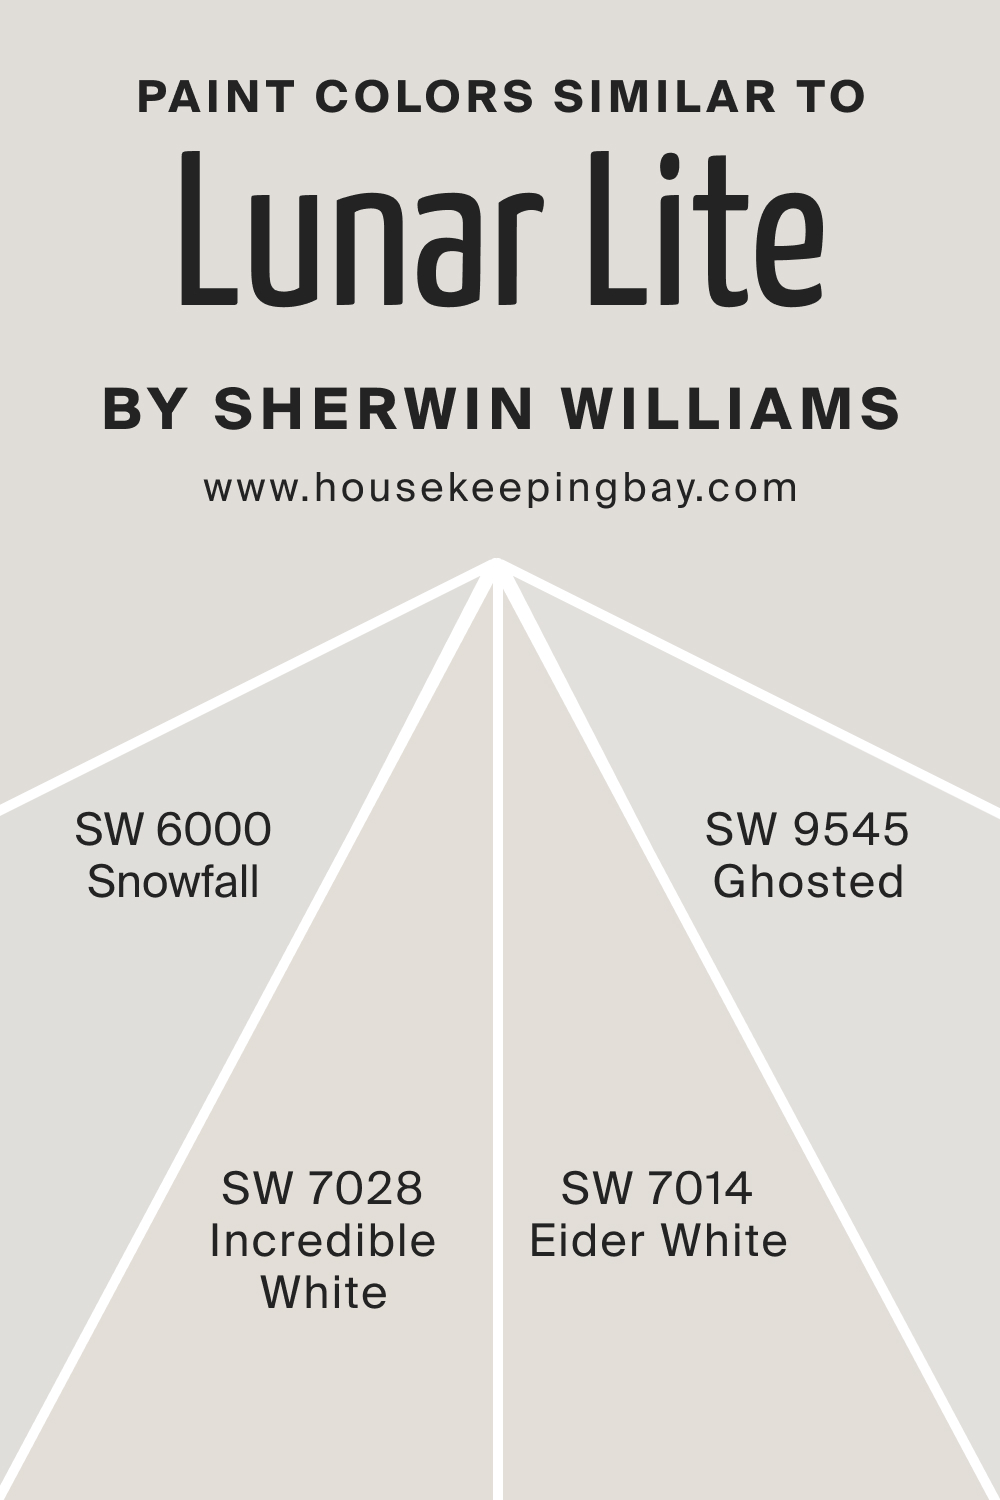 Paint Color Similar to SW 9546 Lunar Lite by Sherwin Williams